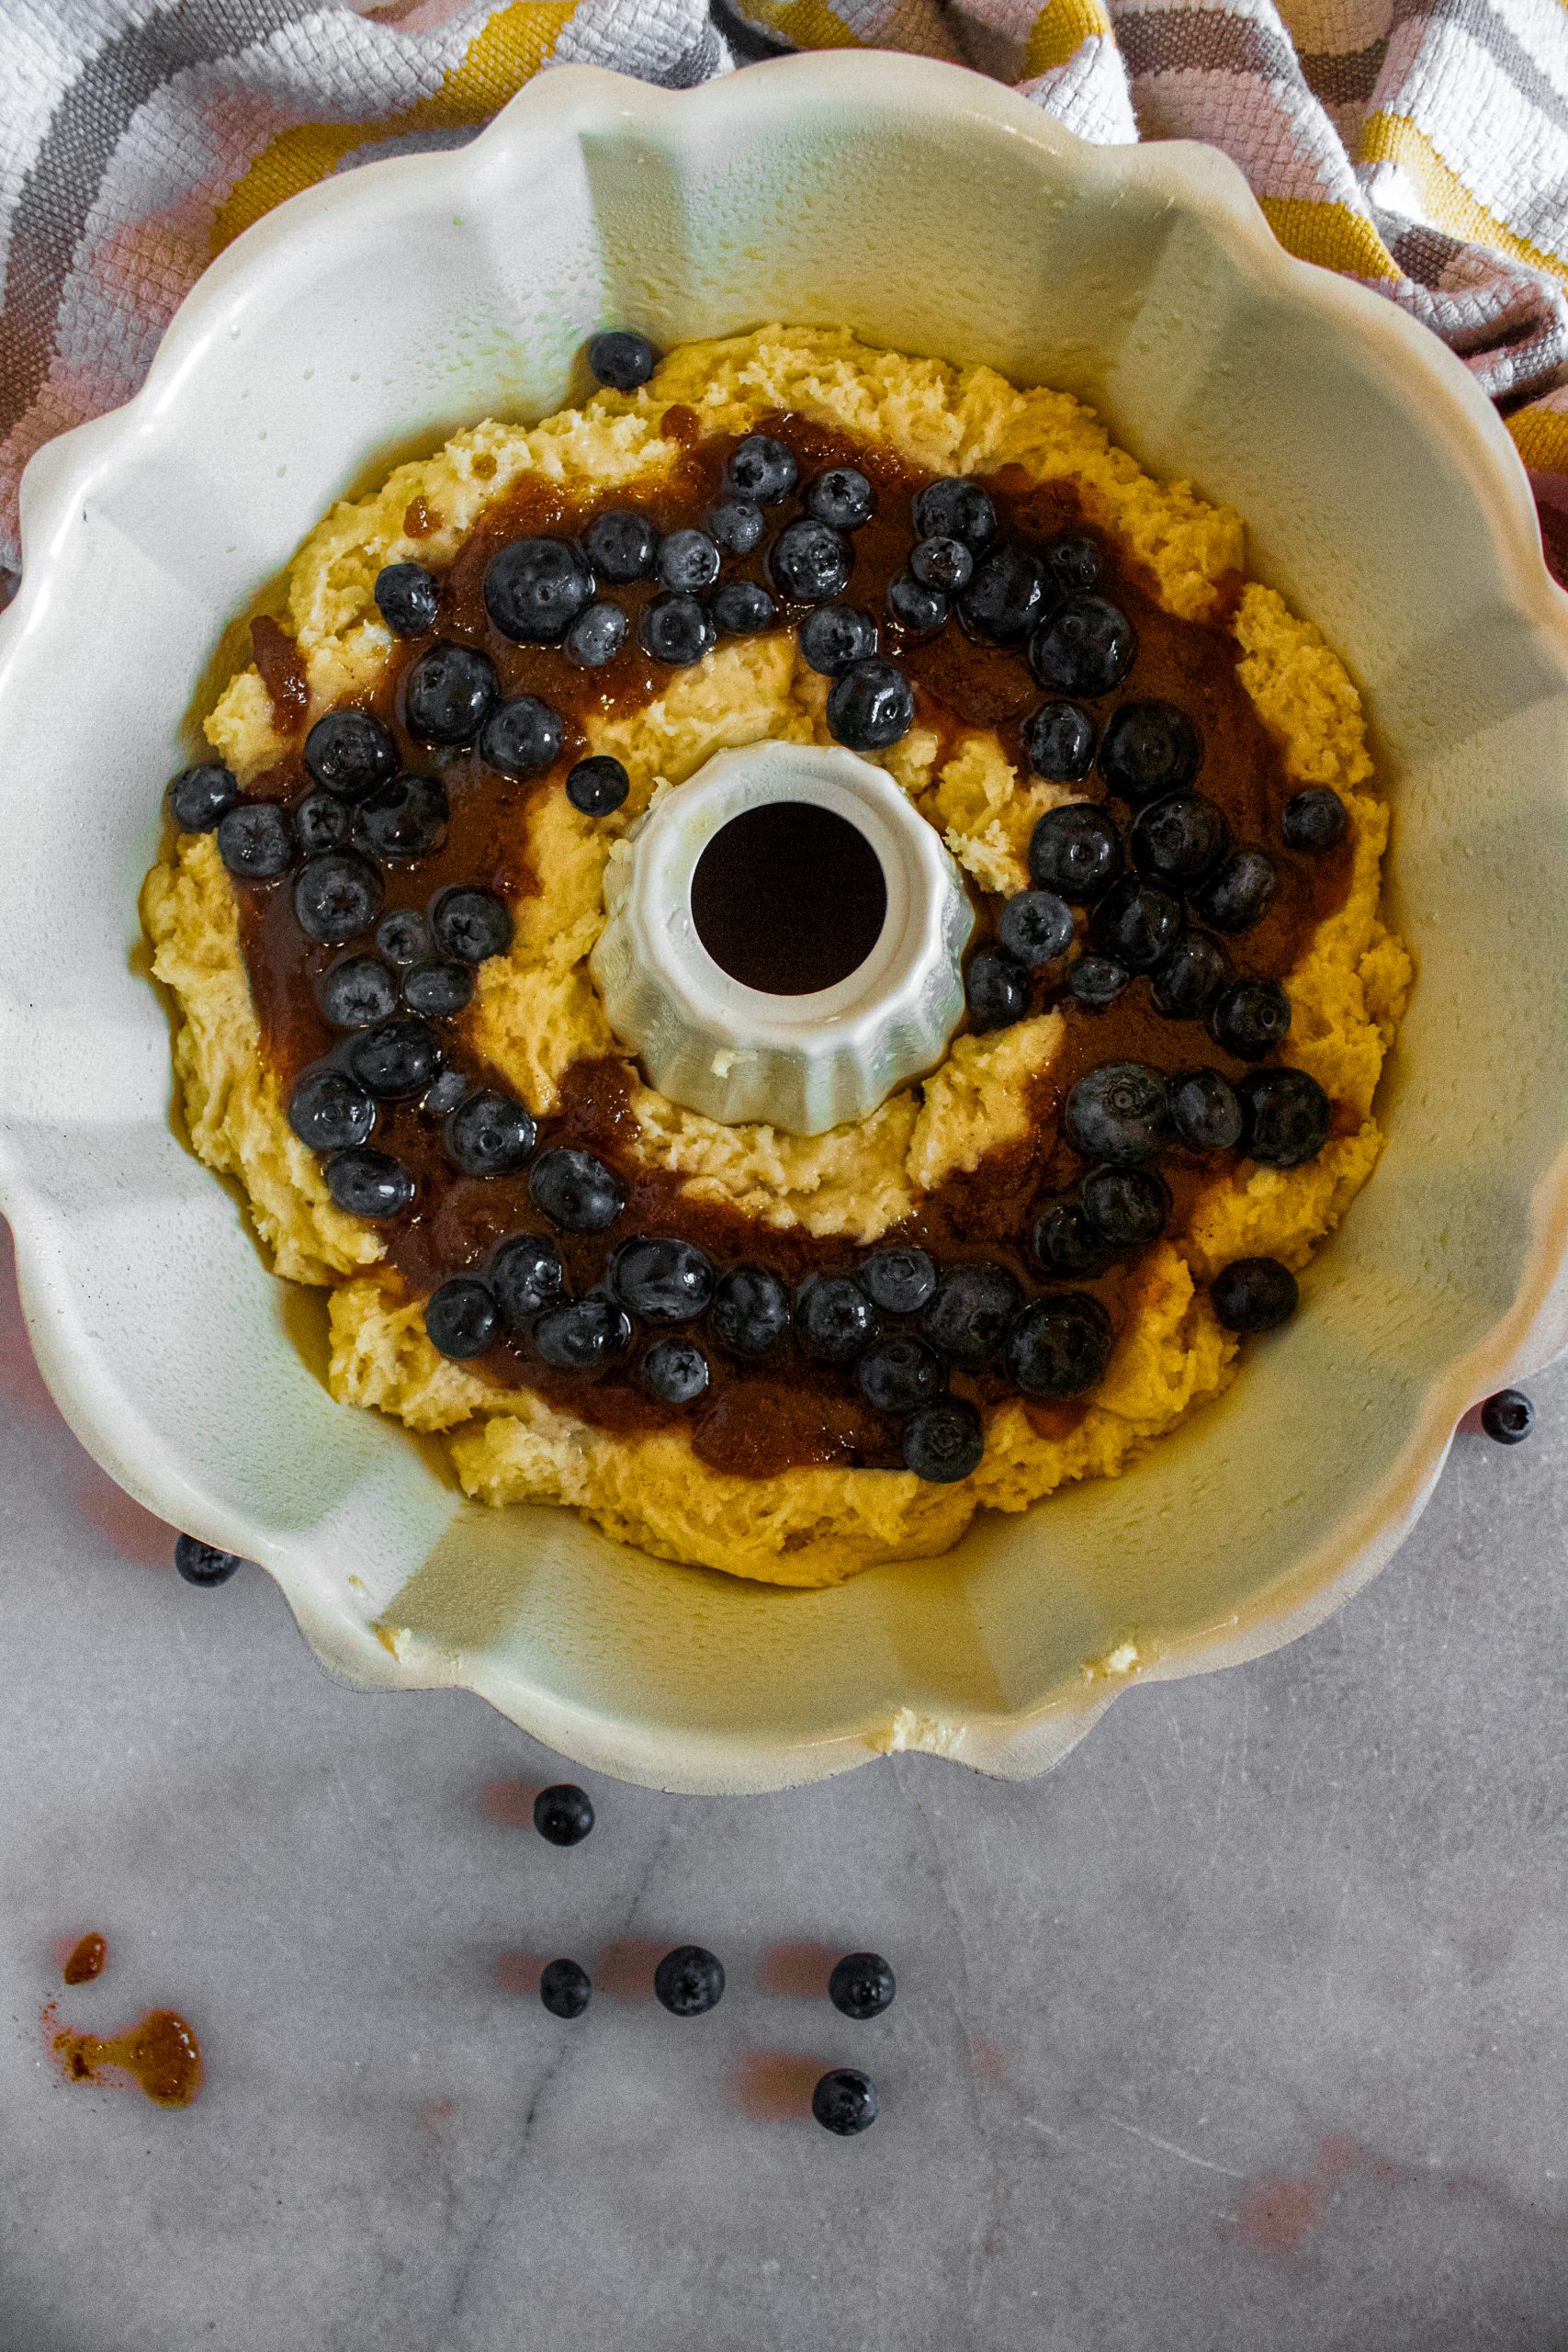 Top with ½ of the blueberries.